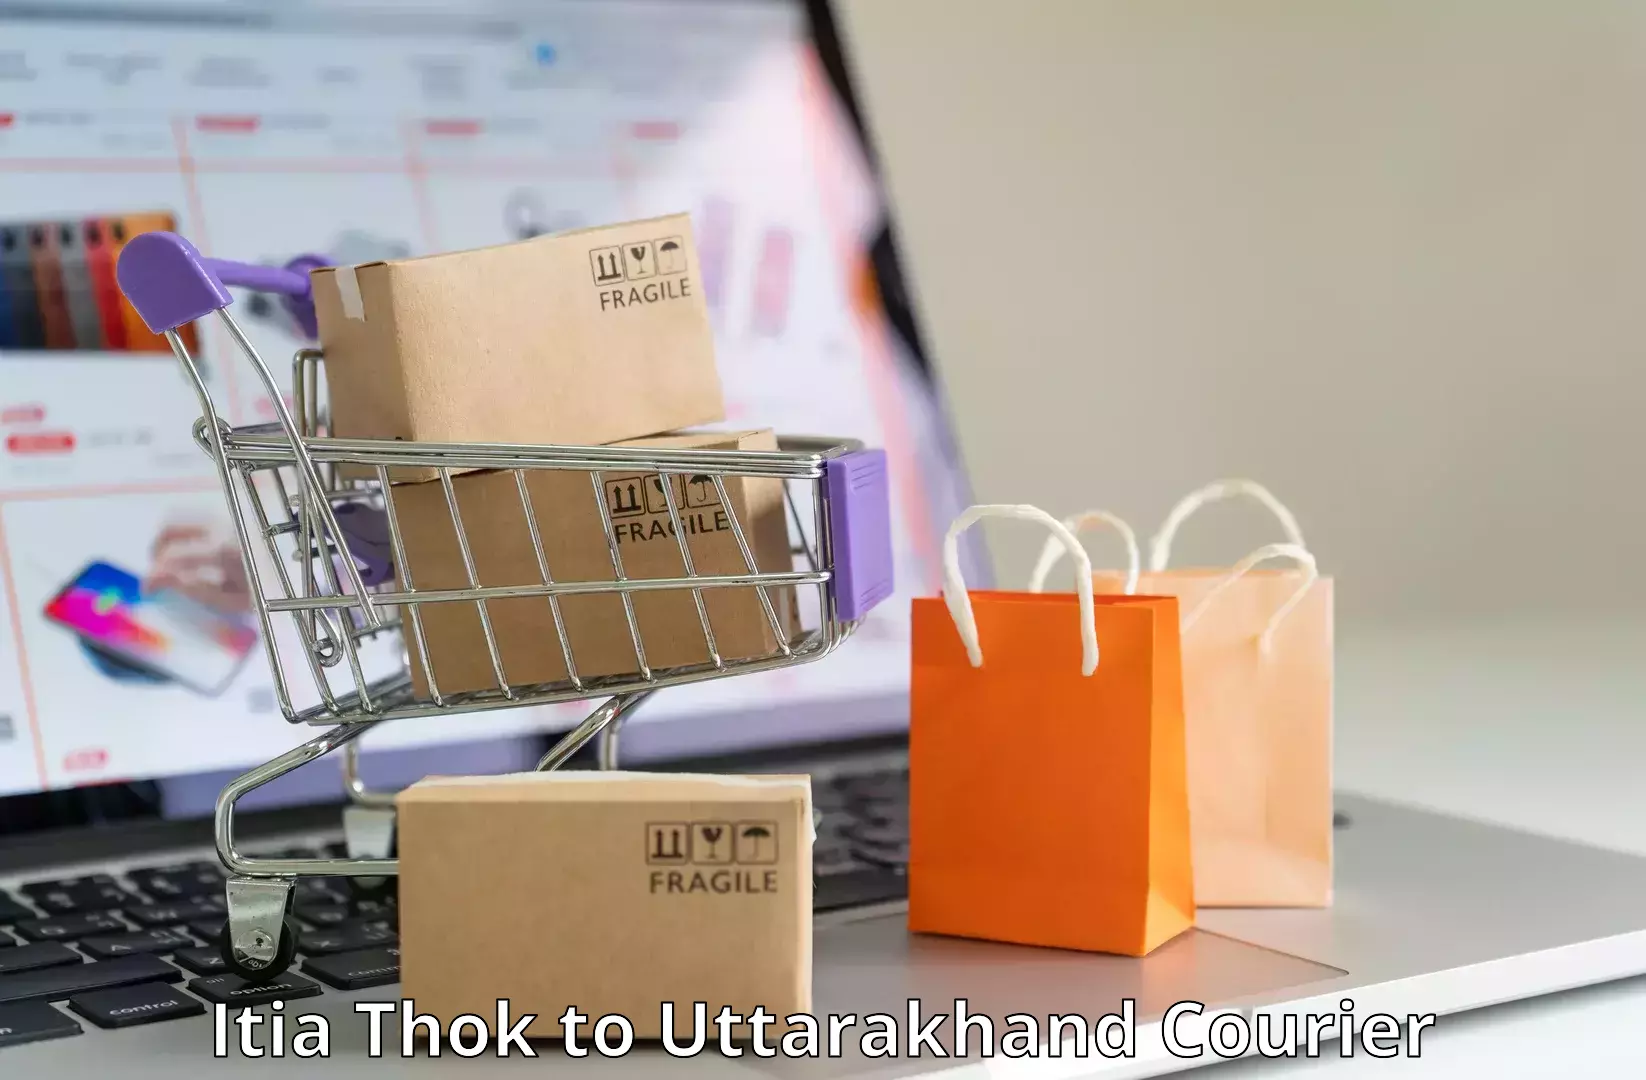 Cost-effective courier solutions Itia Thok to Haldwani